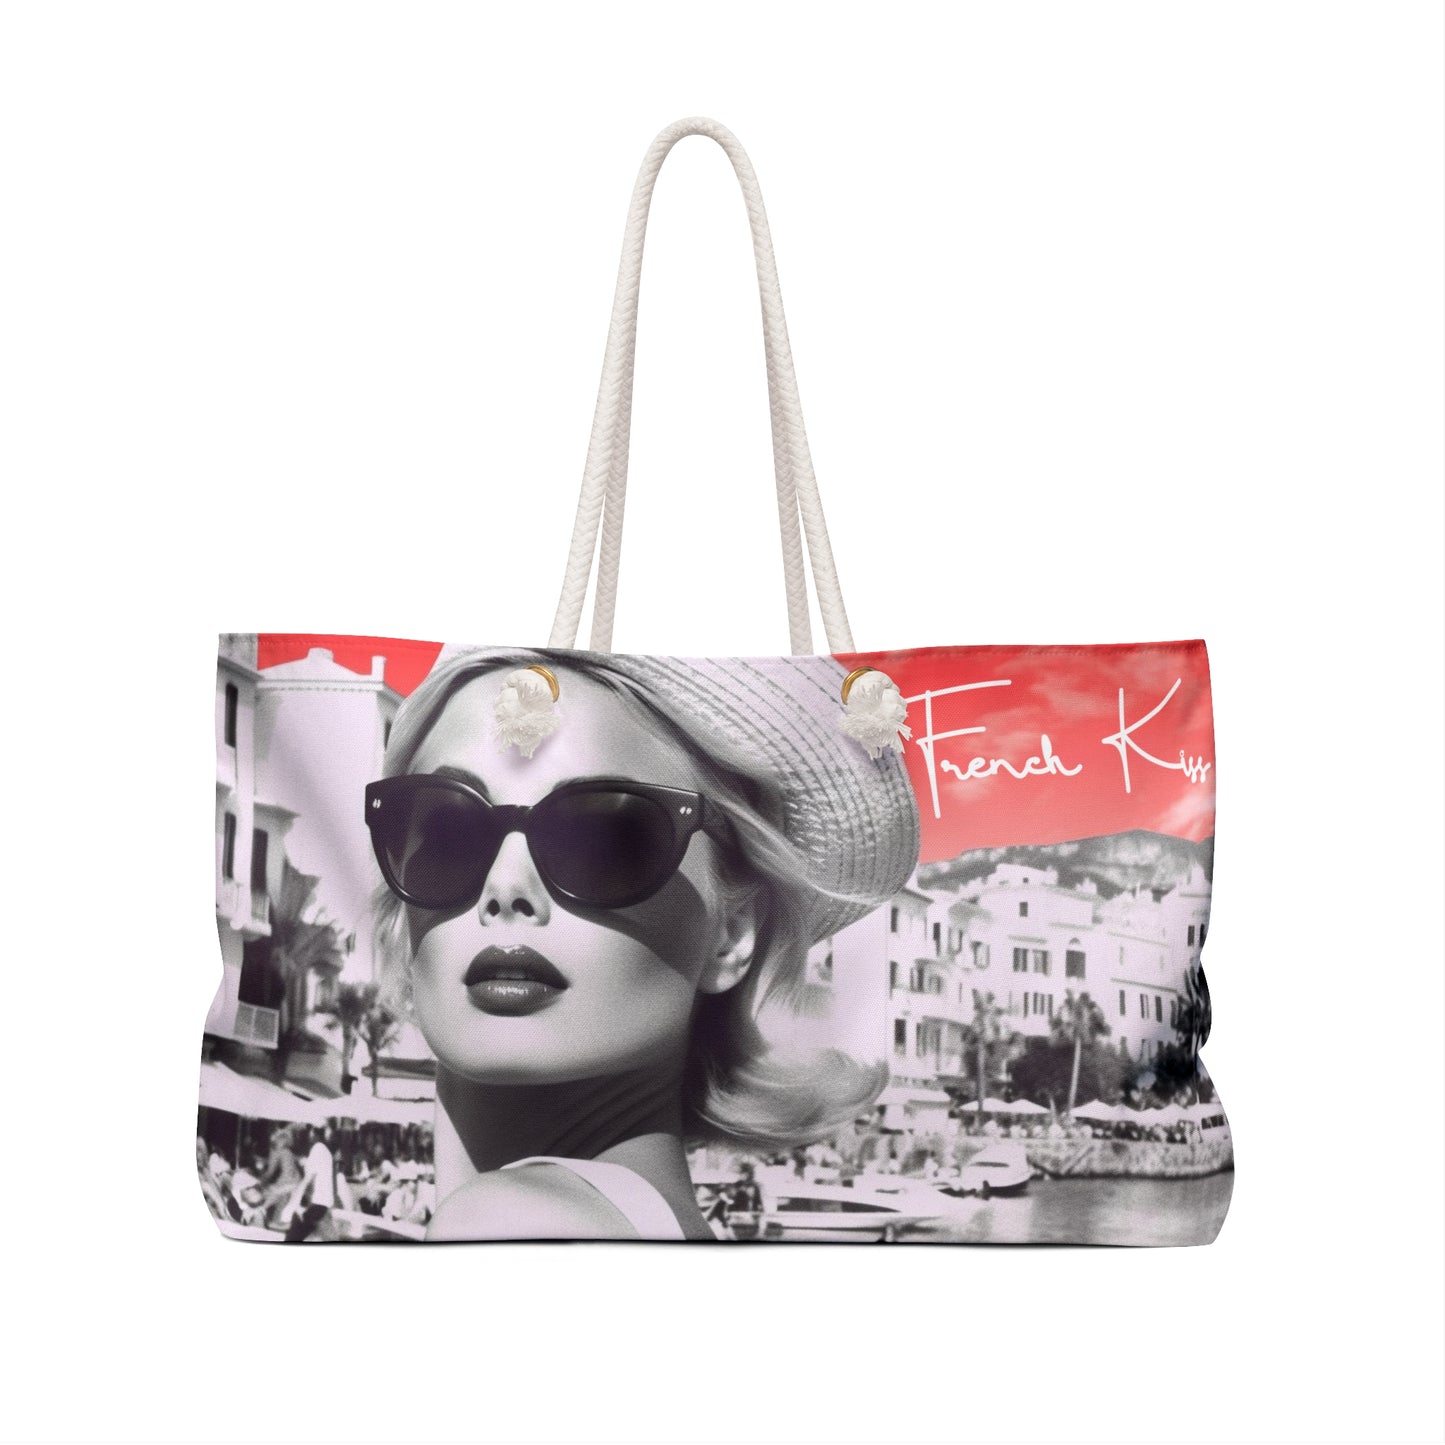 AU PORT Sassy Sexy Chic Weekender Accessory Bag French Kiss Pop Art, Classy, Couture, Travel, Fashion, Beauty gift item